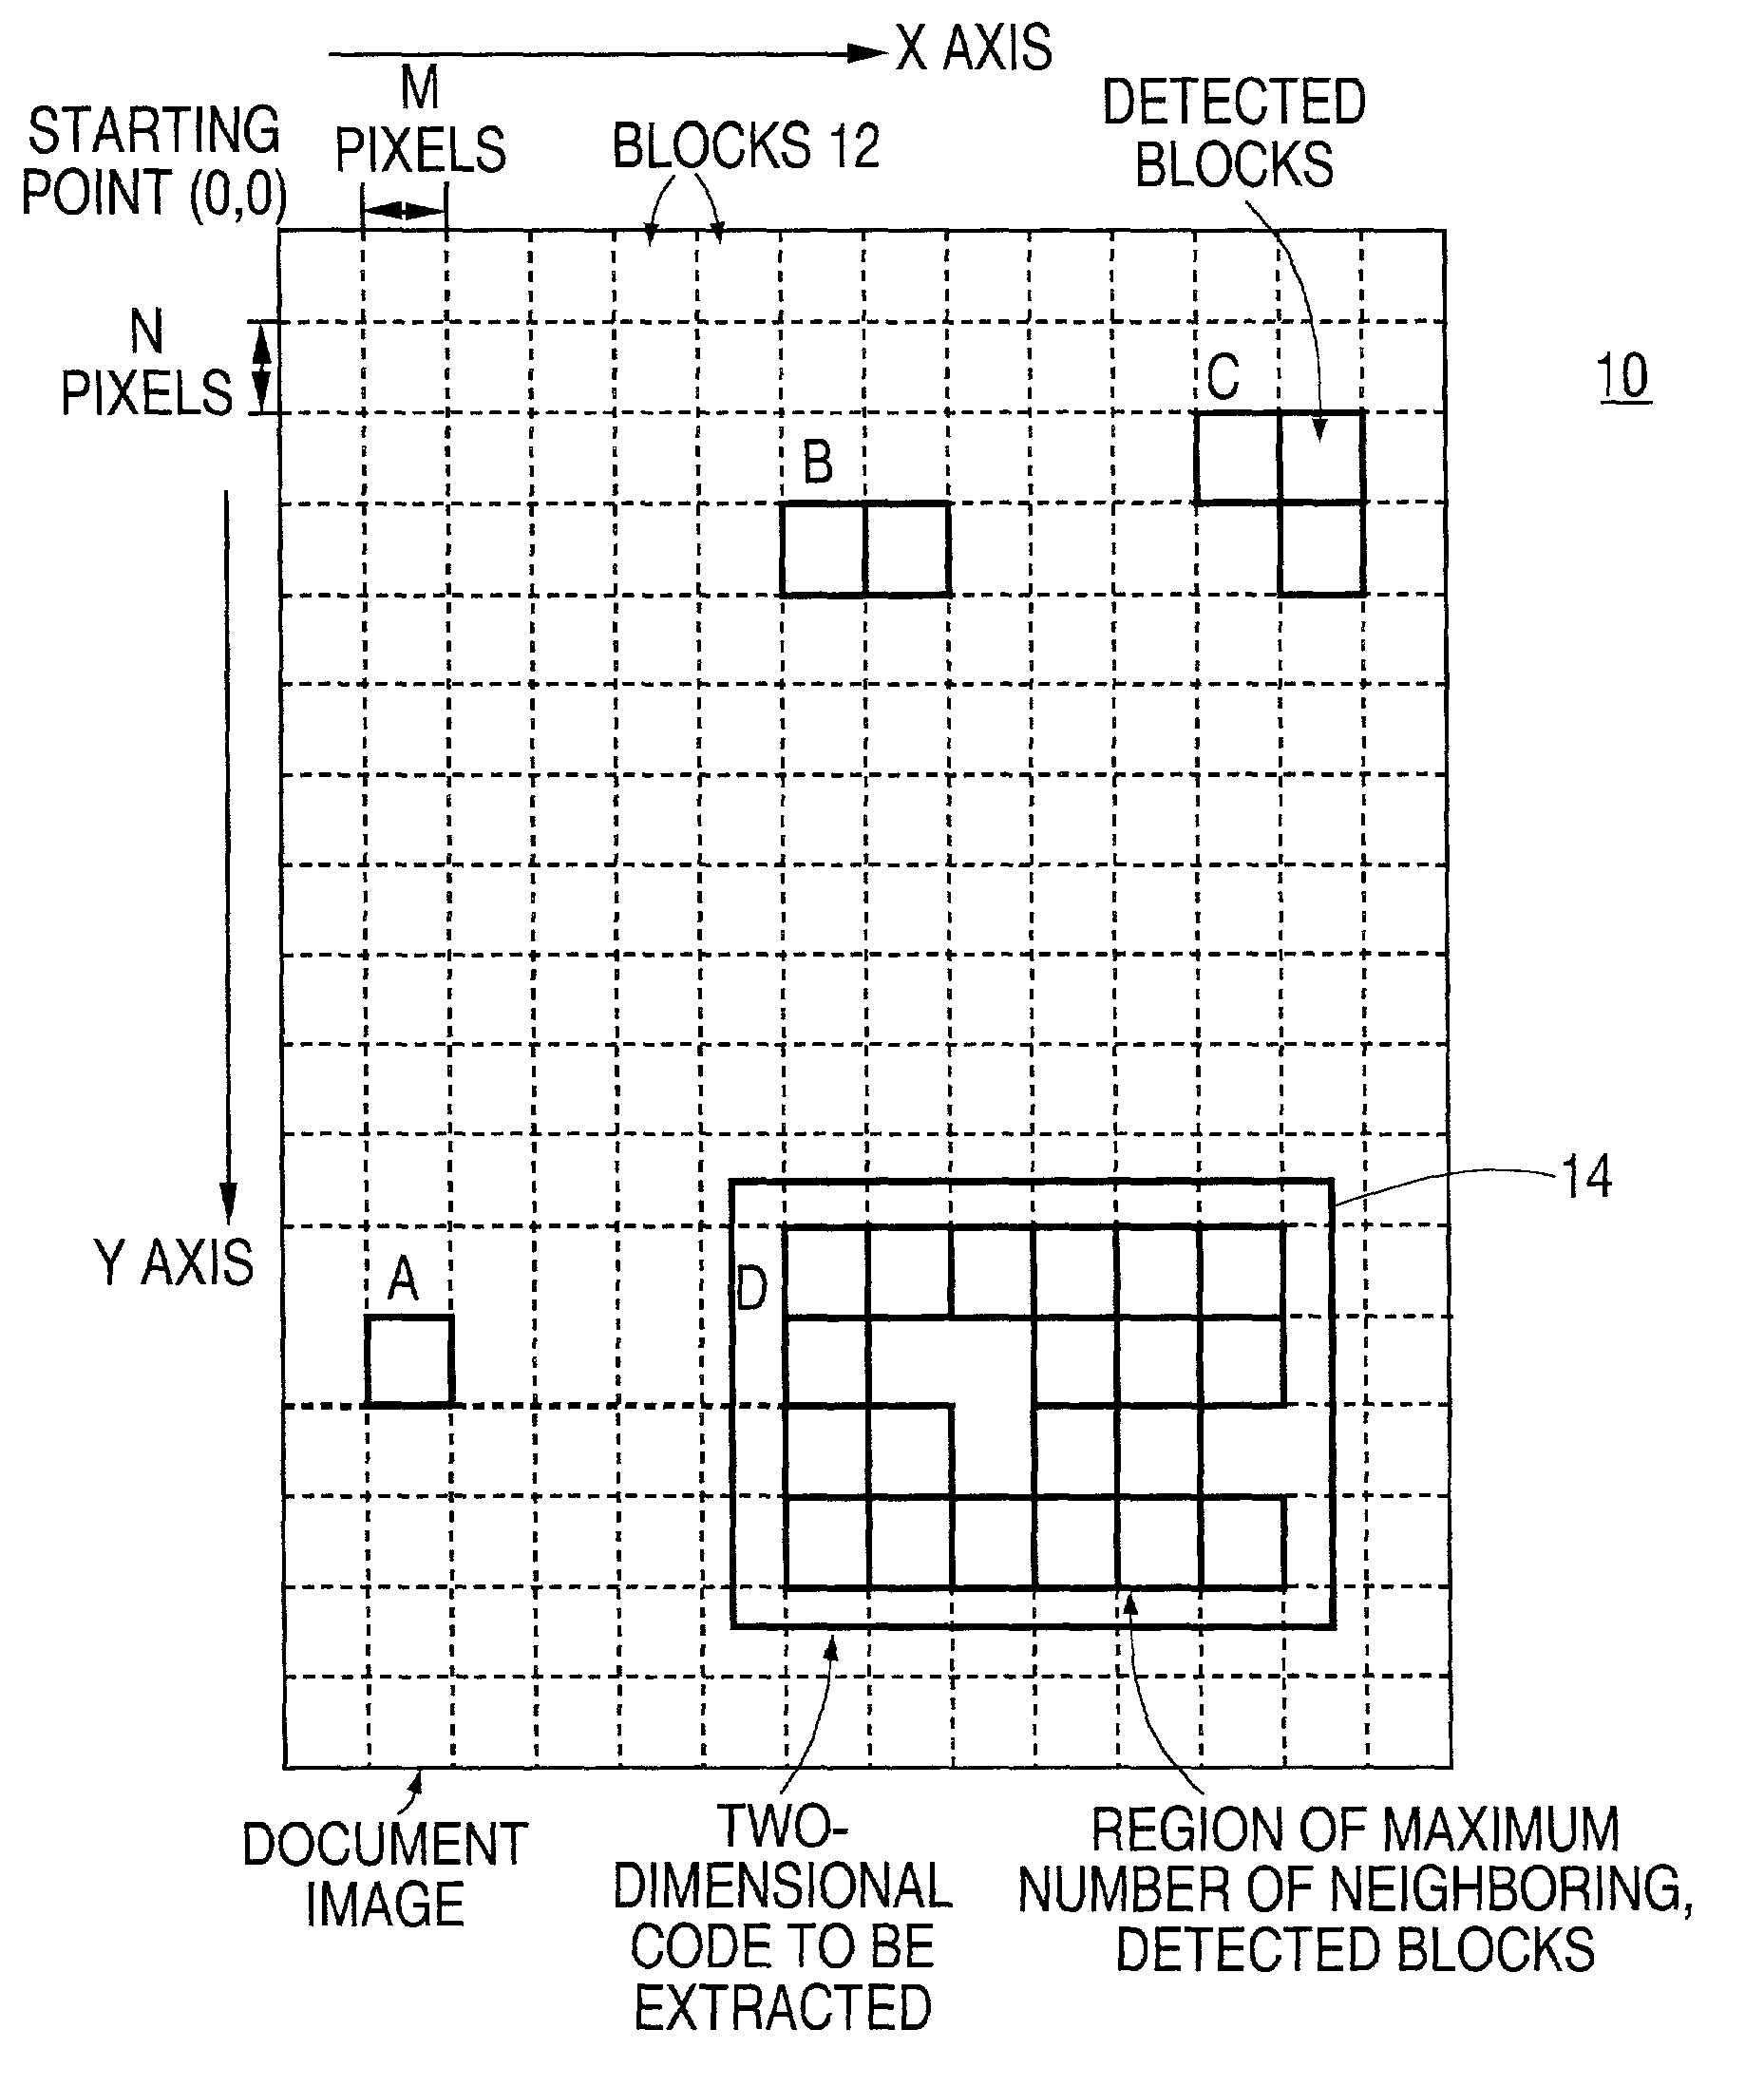 Two-dimensional code extracting method